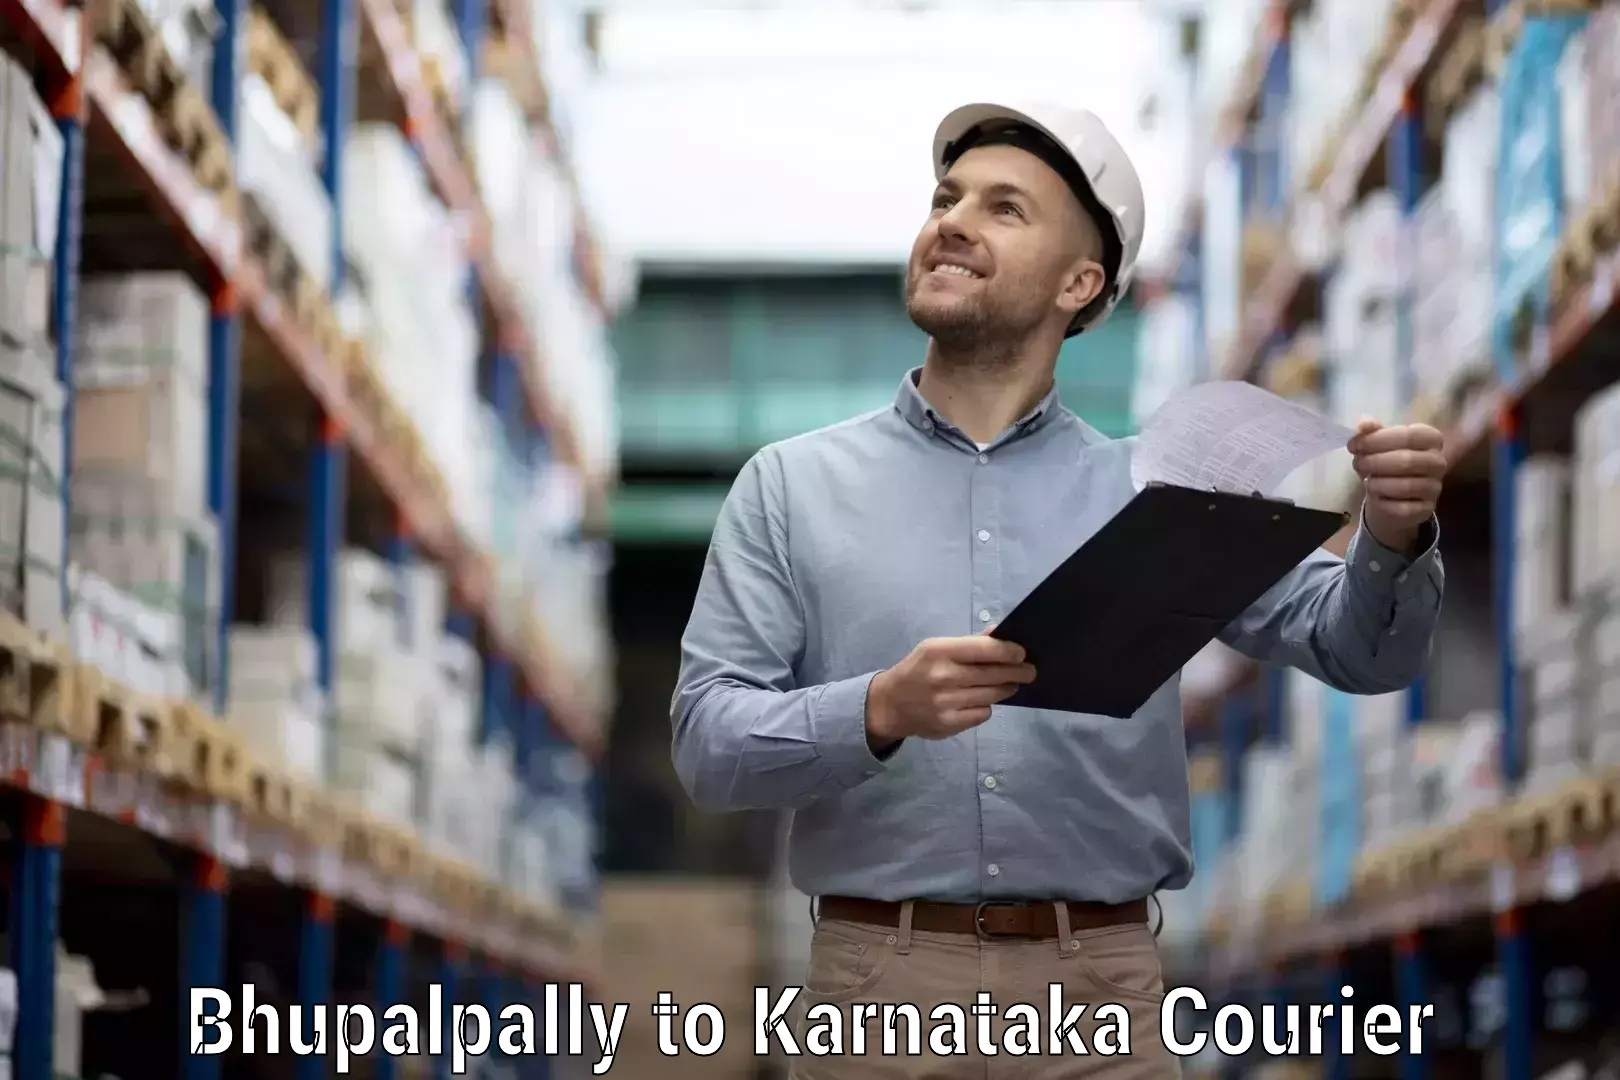 State-of-the-art courier technology Bhupalpally to Yadgir